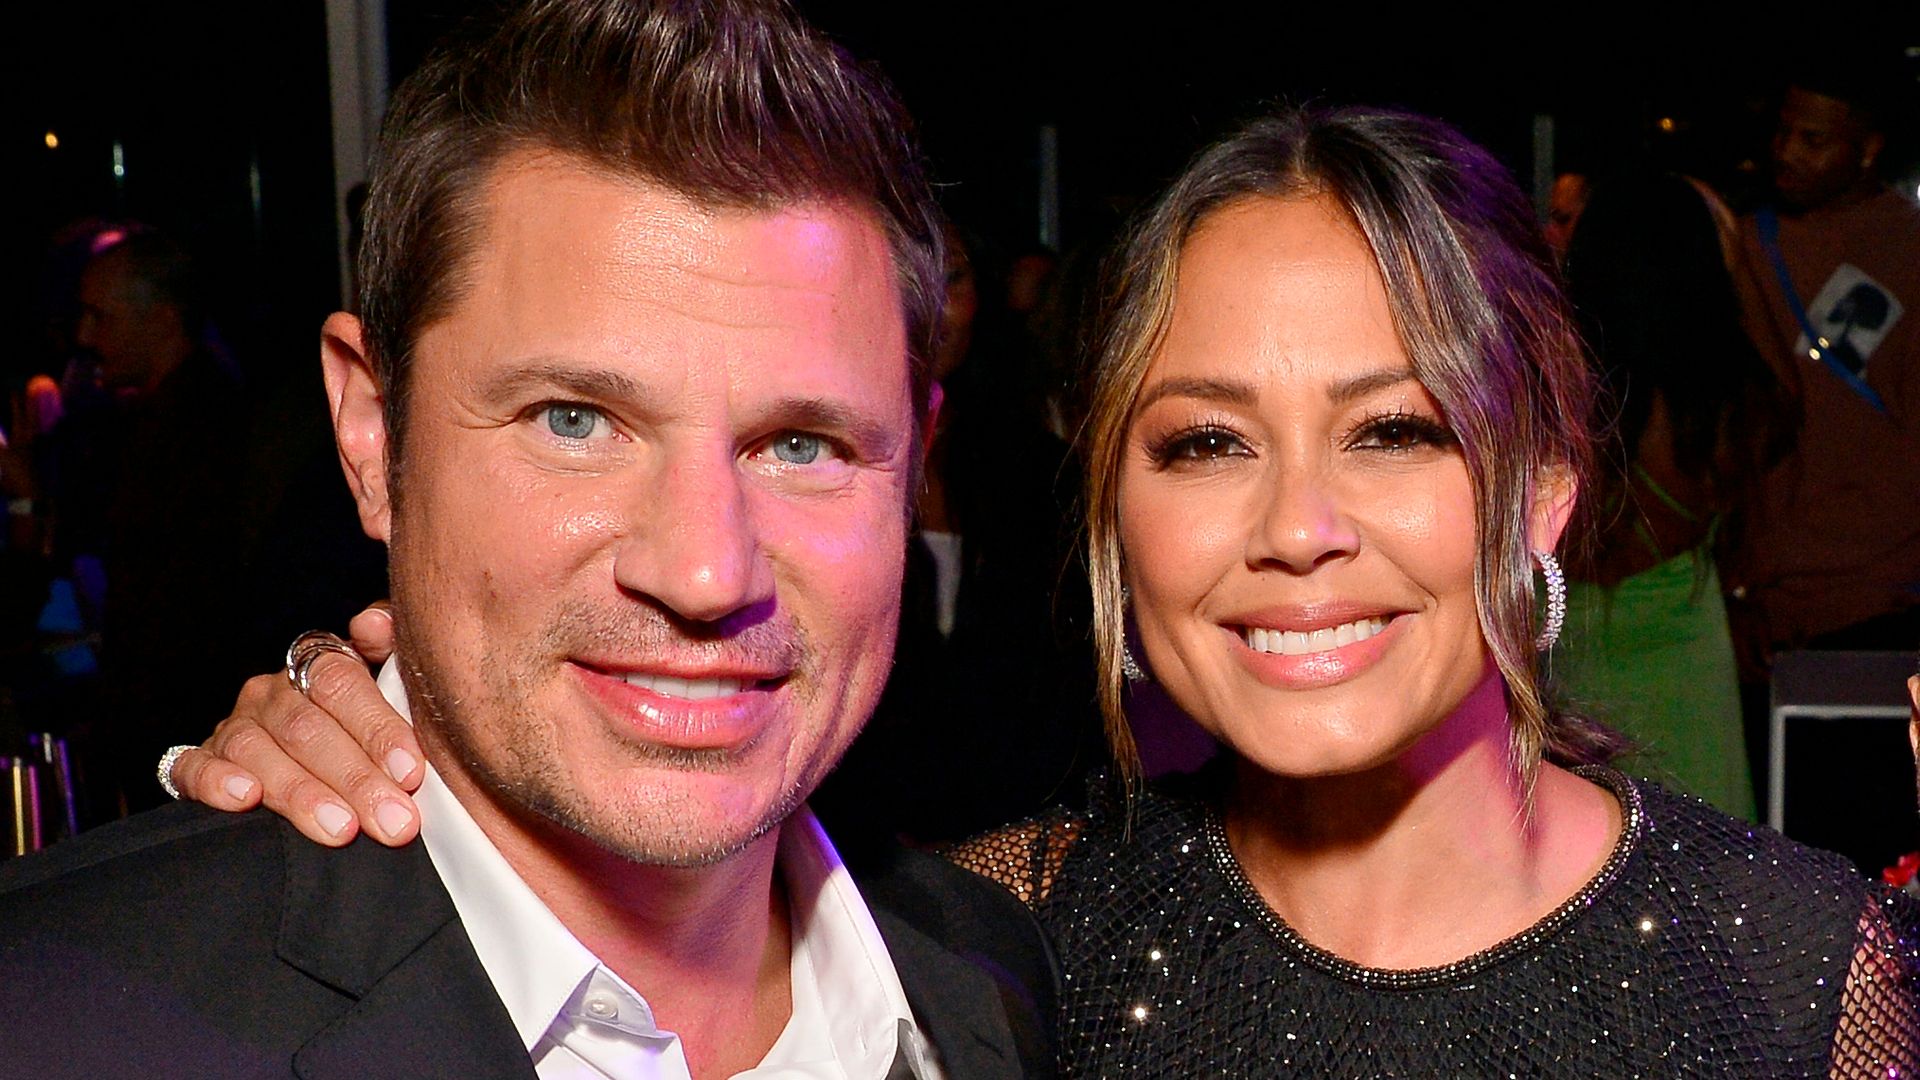 Vanessa Lachey and Nick Lachey smiling at the camera